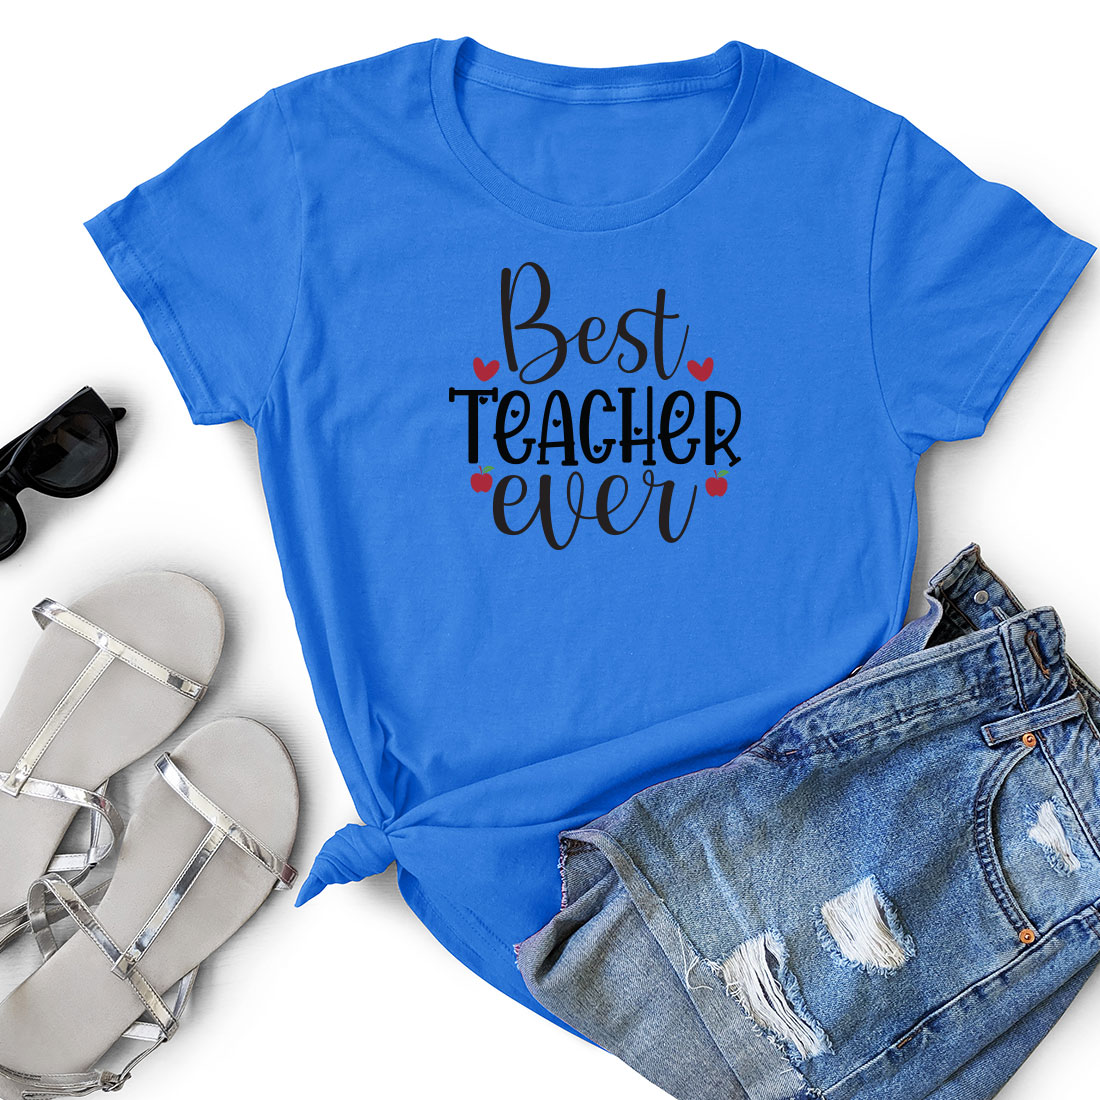 T - shirt that says best teacher ever next to a pair of shorts.